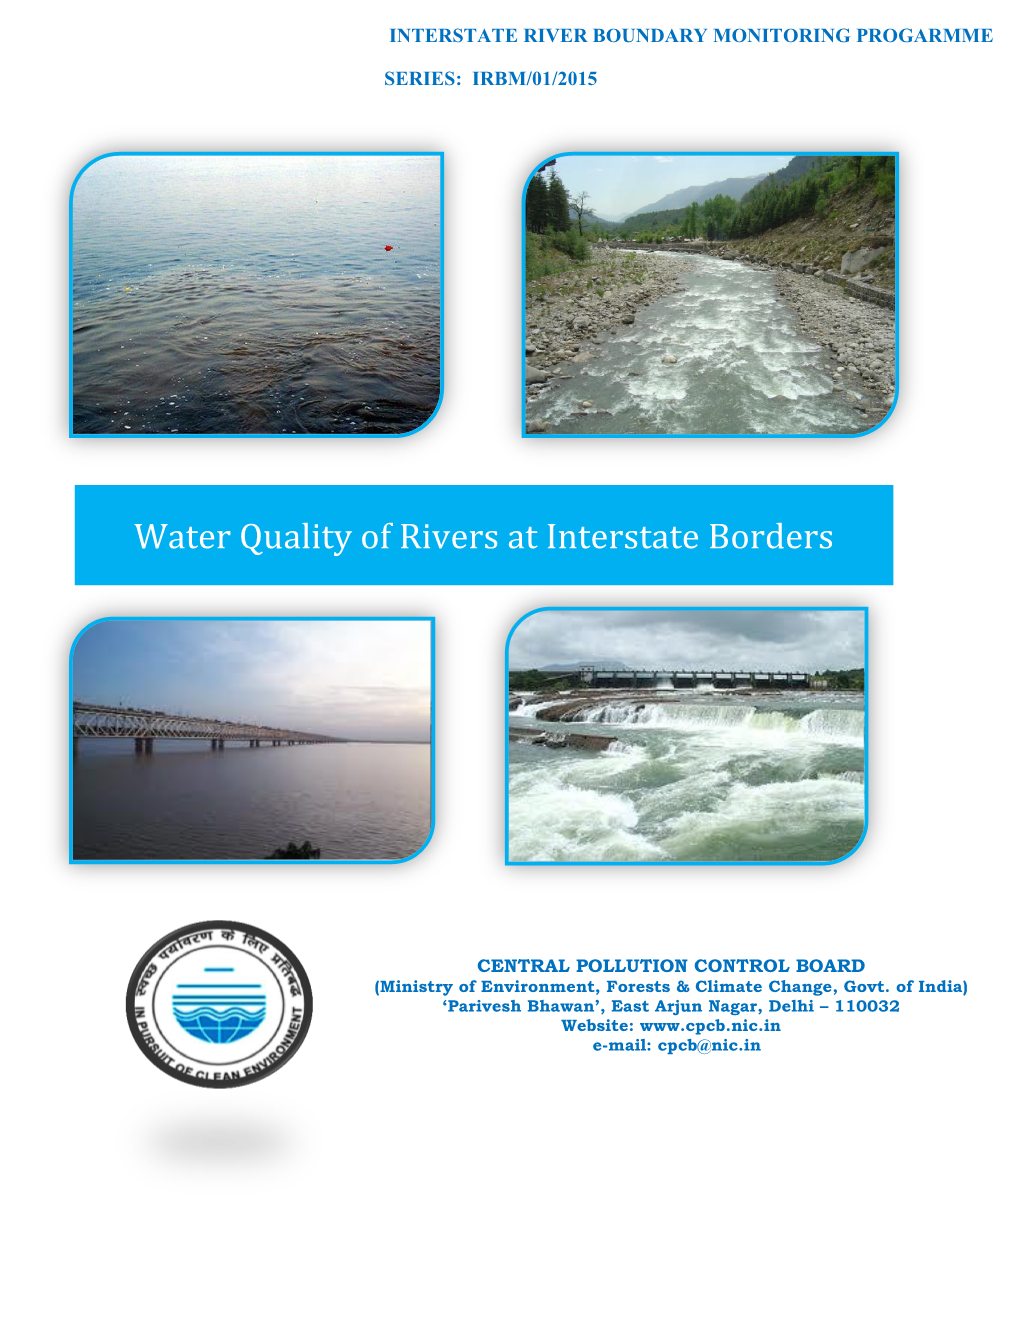 Water Quality of Rivers at Interstate Borders